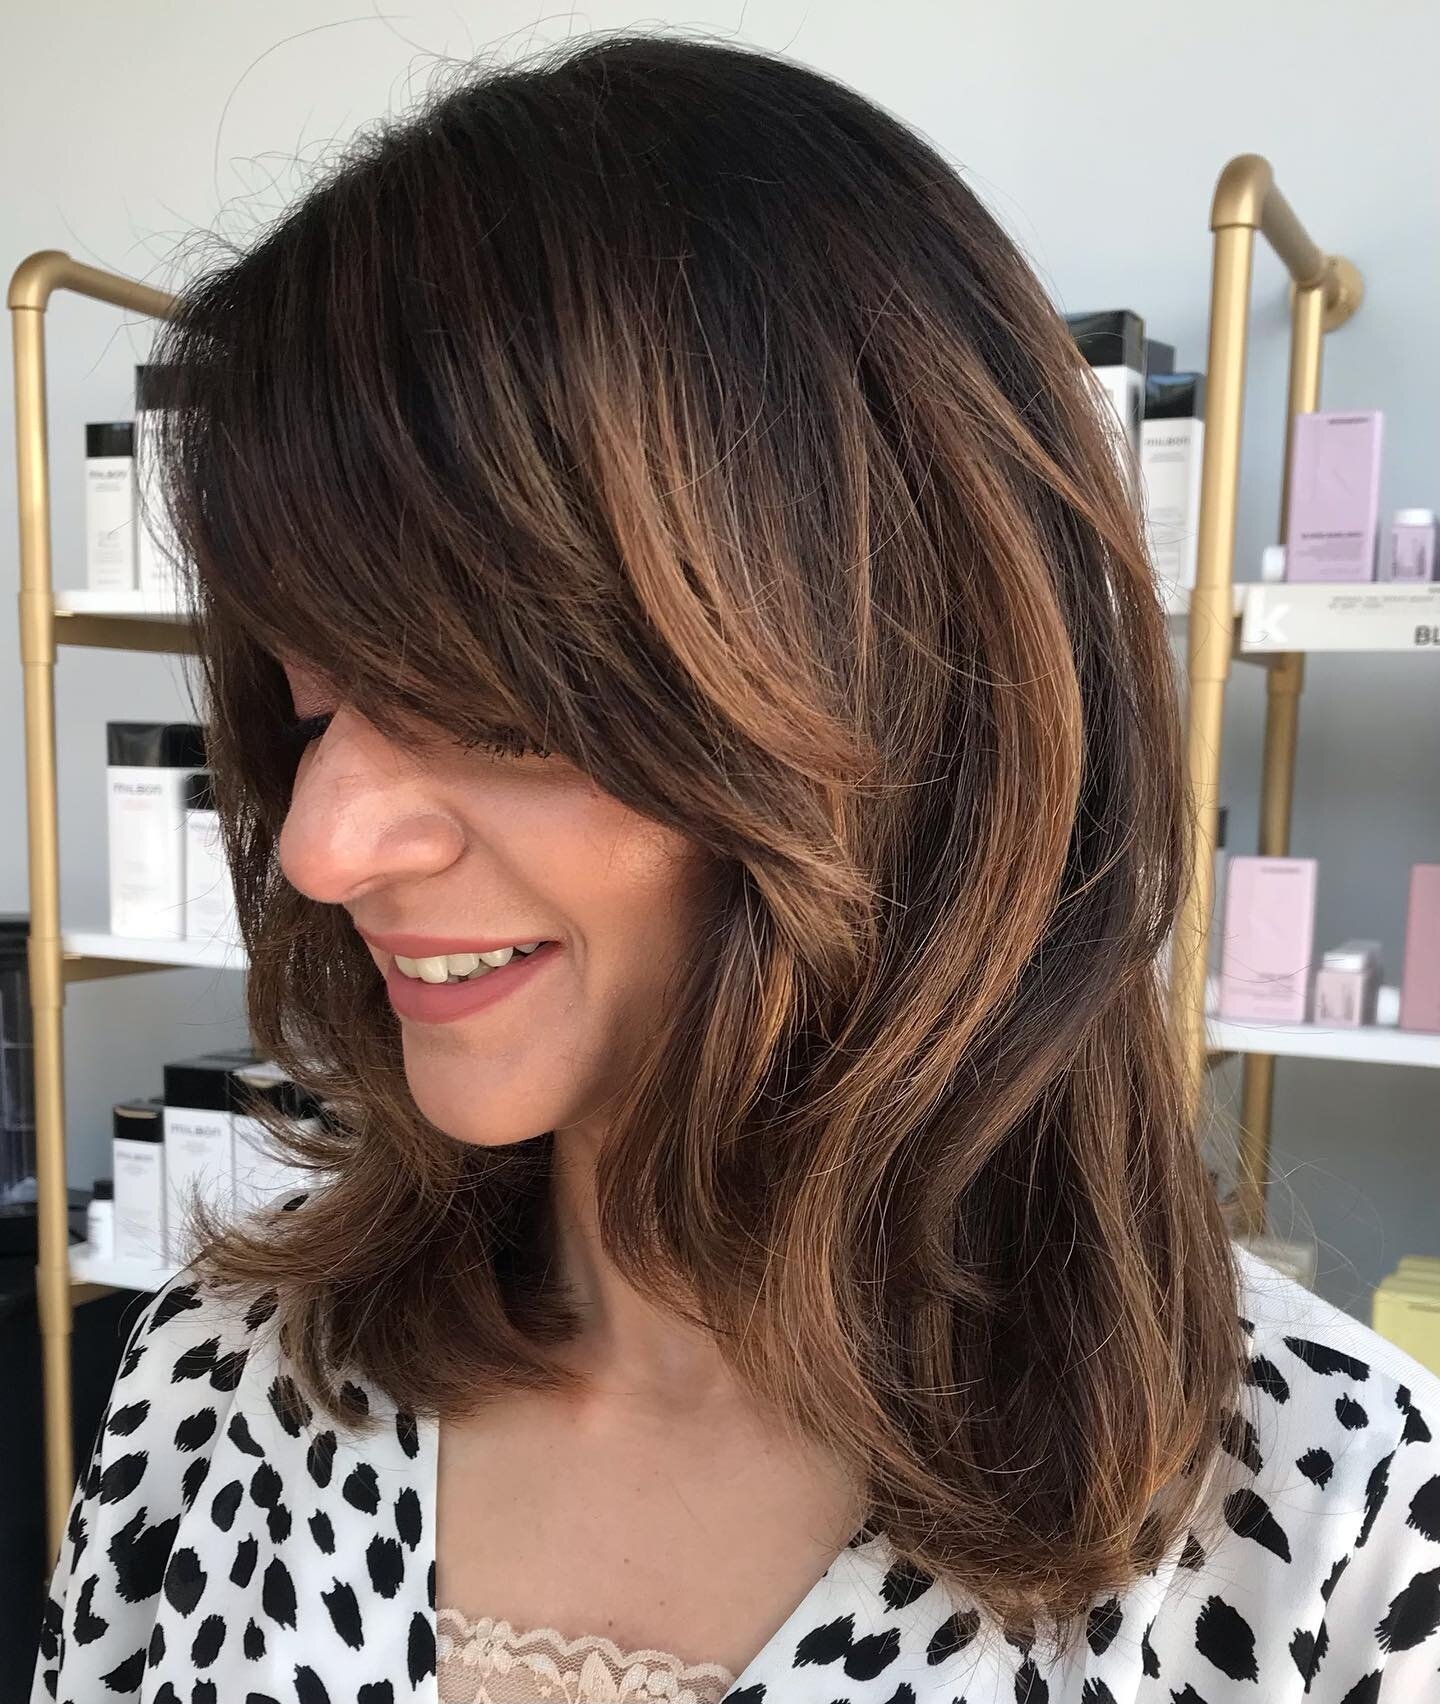 I&rsquo;ve been in love with layered cuts with lots of movement for years, so I&rsquo;m very happy that the butterfly cut is becoming such a big trend. 😊🦋❤️⁠
⁠
#butteflycut #butterflyhaircut #layeredcut #layeredhaircut #90shairtrend #bigblowdry #fe